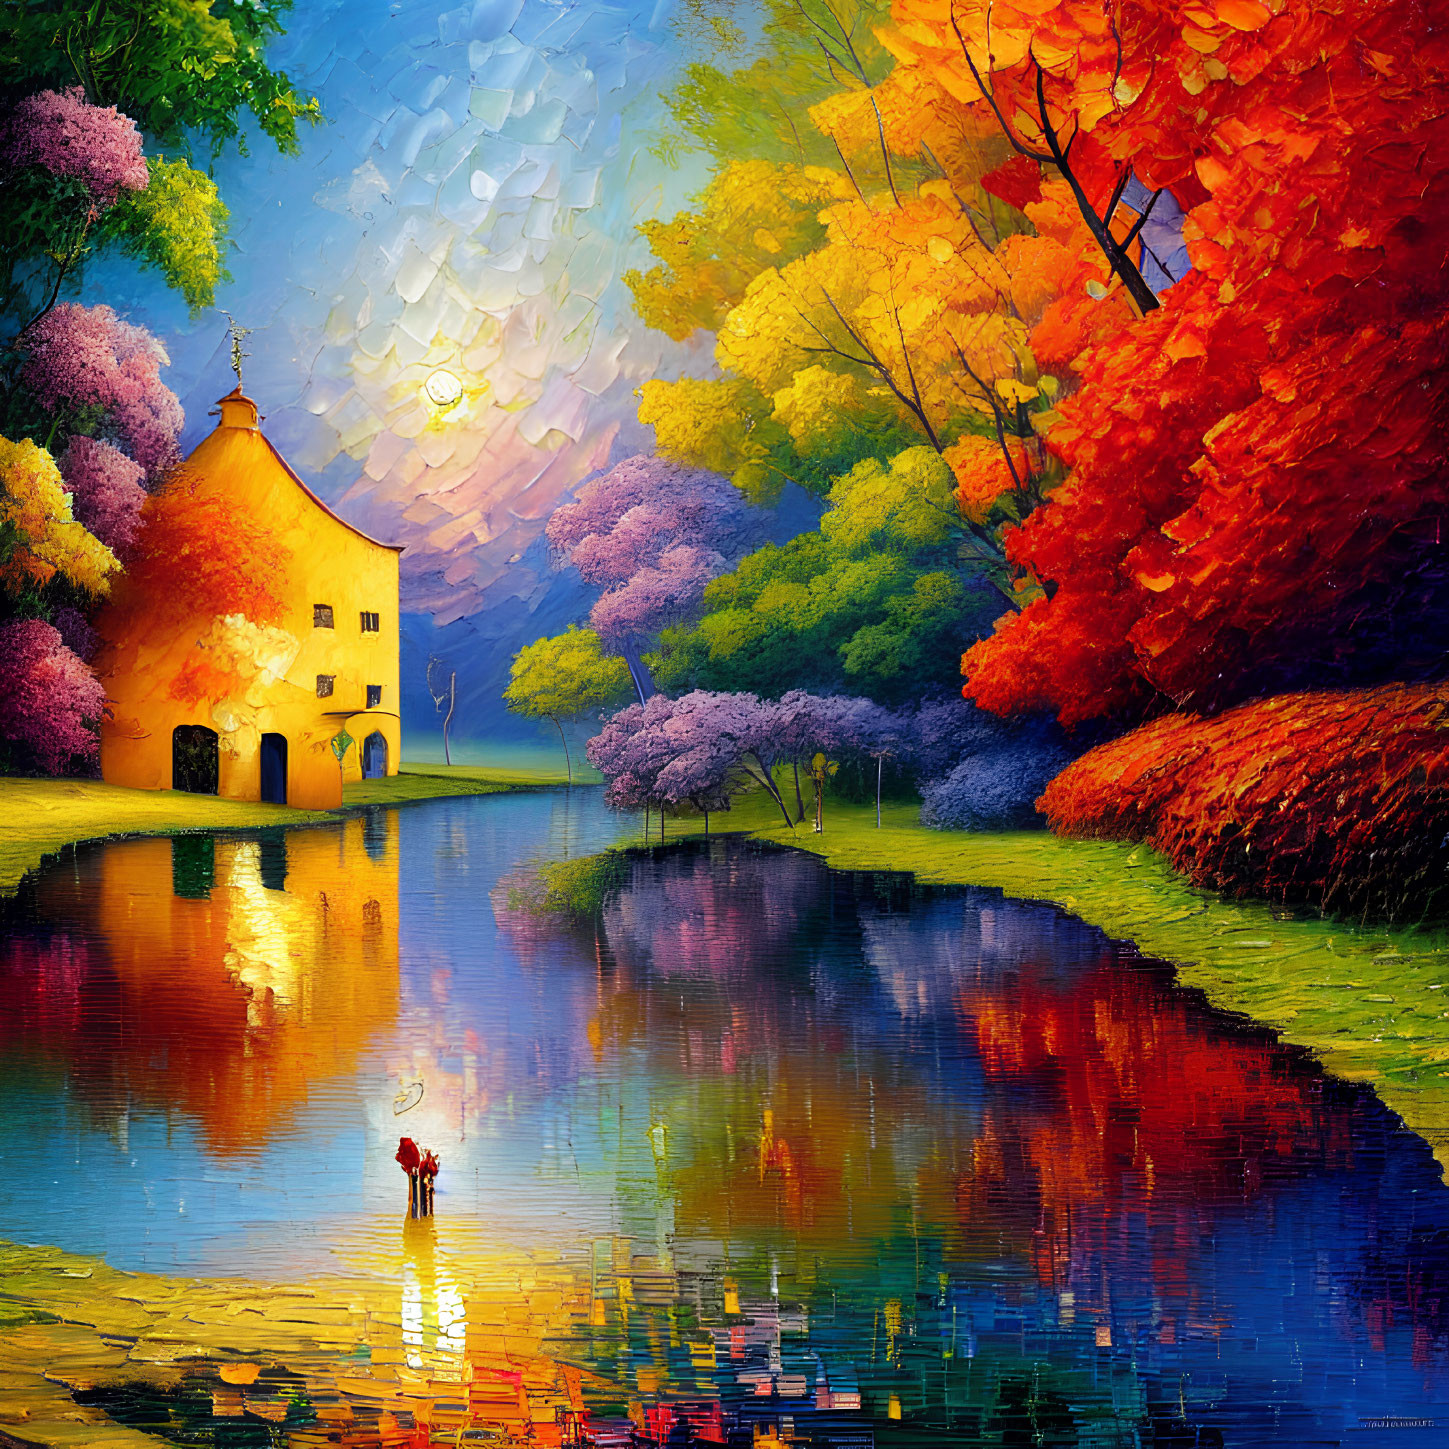 Colorful painting of idyllic house by lake with vibrant trees and textured sky